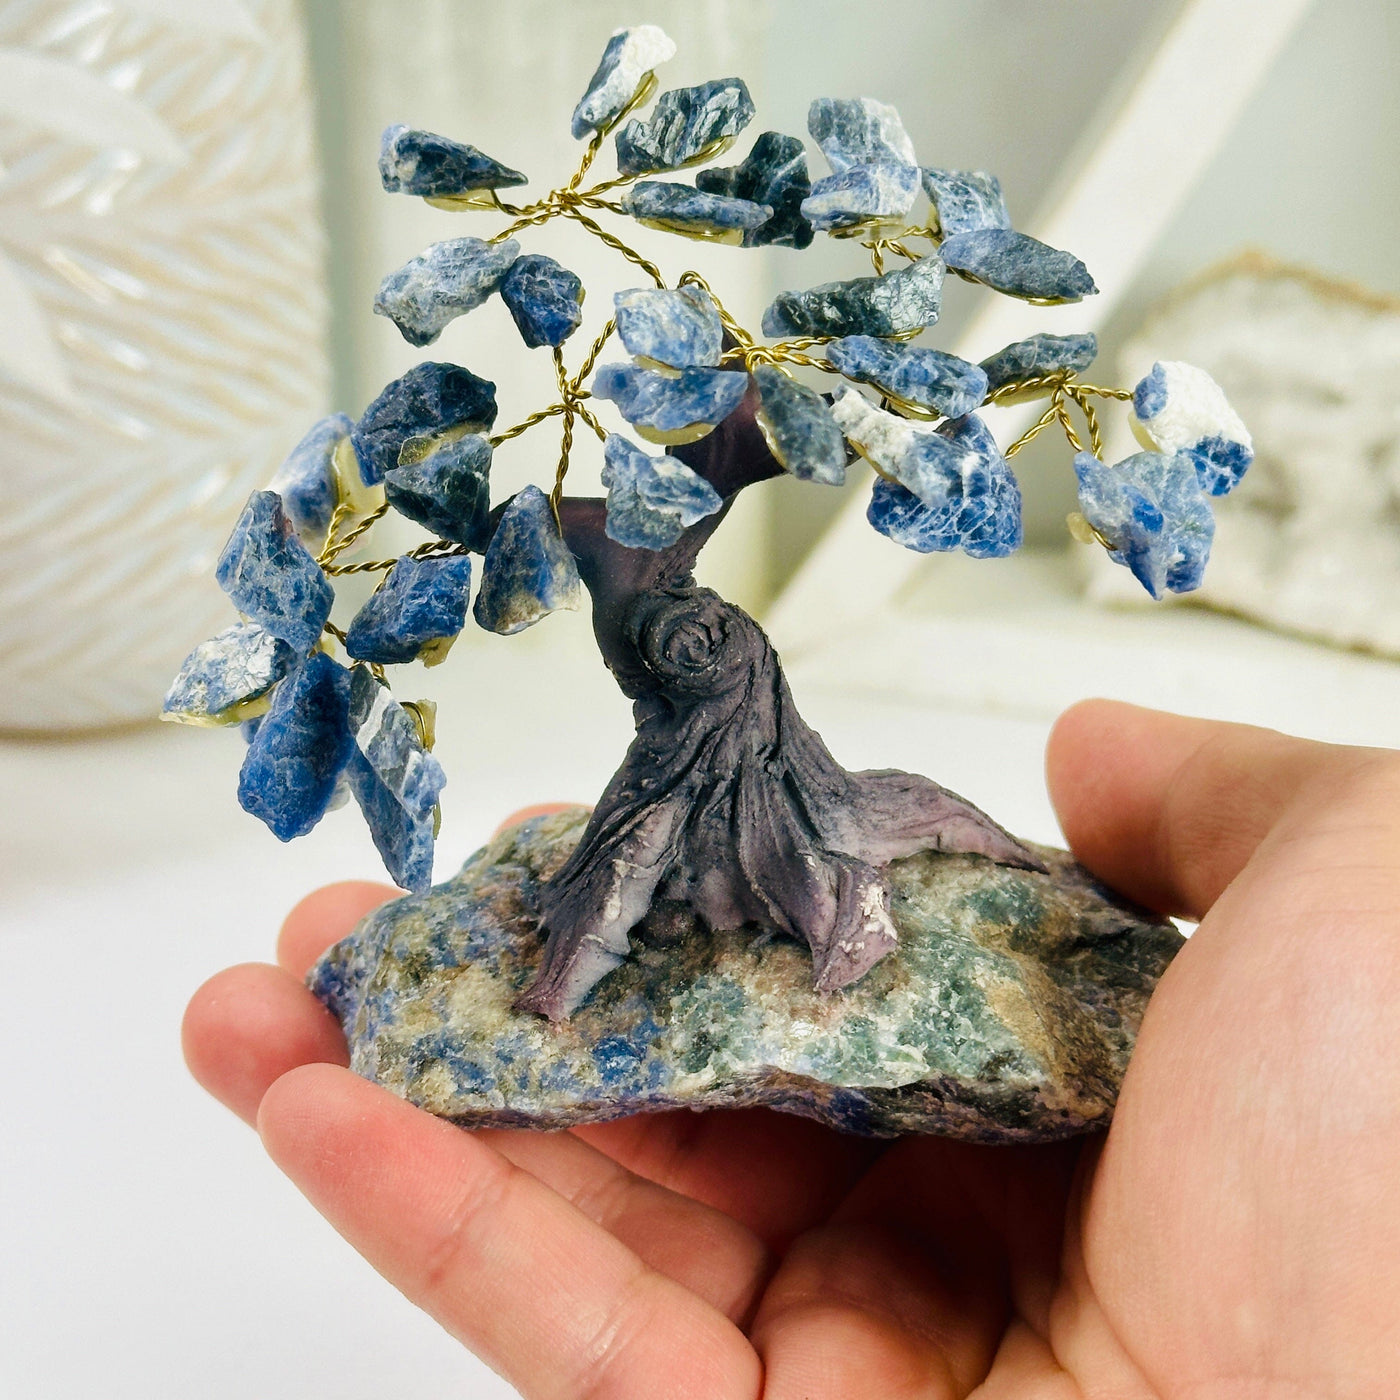  Sodalite Stone Tree - Tumbled Stone Tree on Rough Sodalite Base front view in hand for size reference